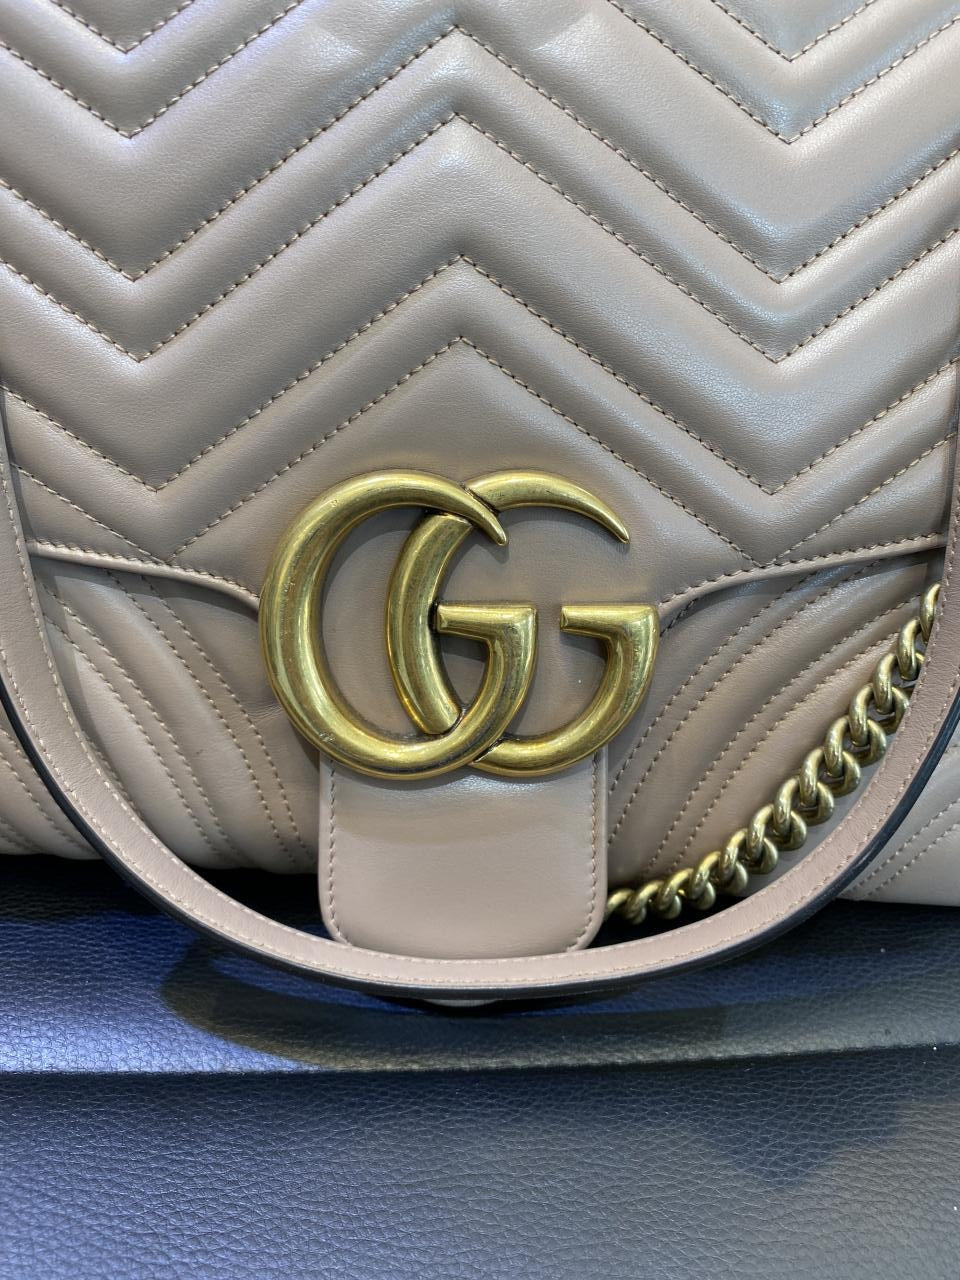 landing Betinget Skygge Pre-Owned GUCCI GG Marmont Large Chain Shoulder Bag Dusty Pink Matelas -  michaelmosesvault.com